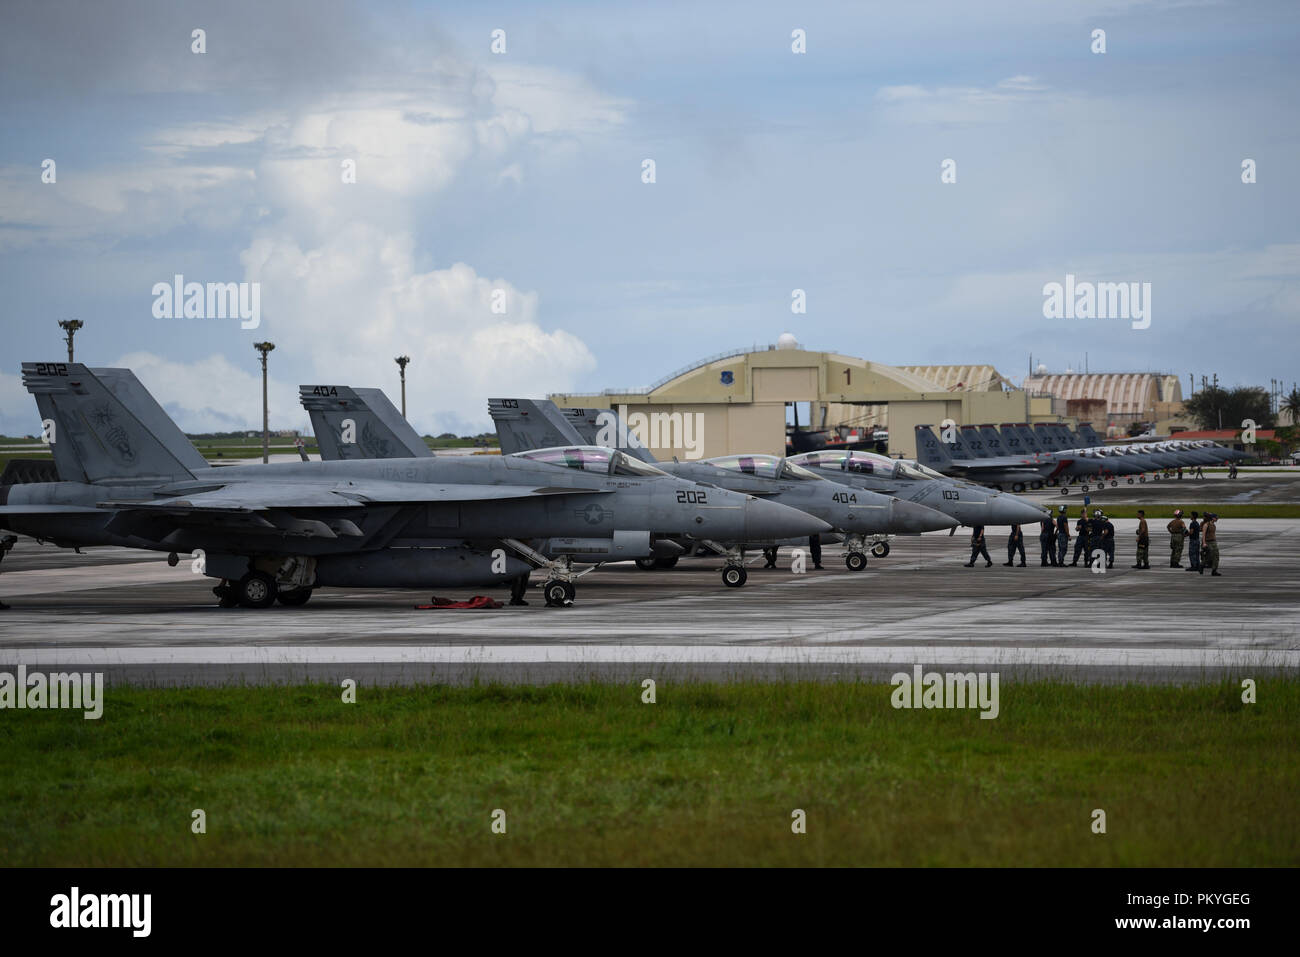 U.S. Navy F/A-18F/E Super Hornets arrive Sept. 15, 2018, at Andersen Air Force Base, Guam. The aircraft are set to participate in exercise Valiant Shield 2018. Valiant Shield is a biennial, U.S. only, field training exercise with a focus on integration of joint training among U.S. forces. (U.S. Air Force photo by Senior Airmen Gerald R. Willis) Stock Photo